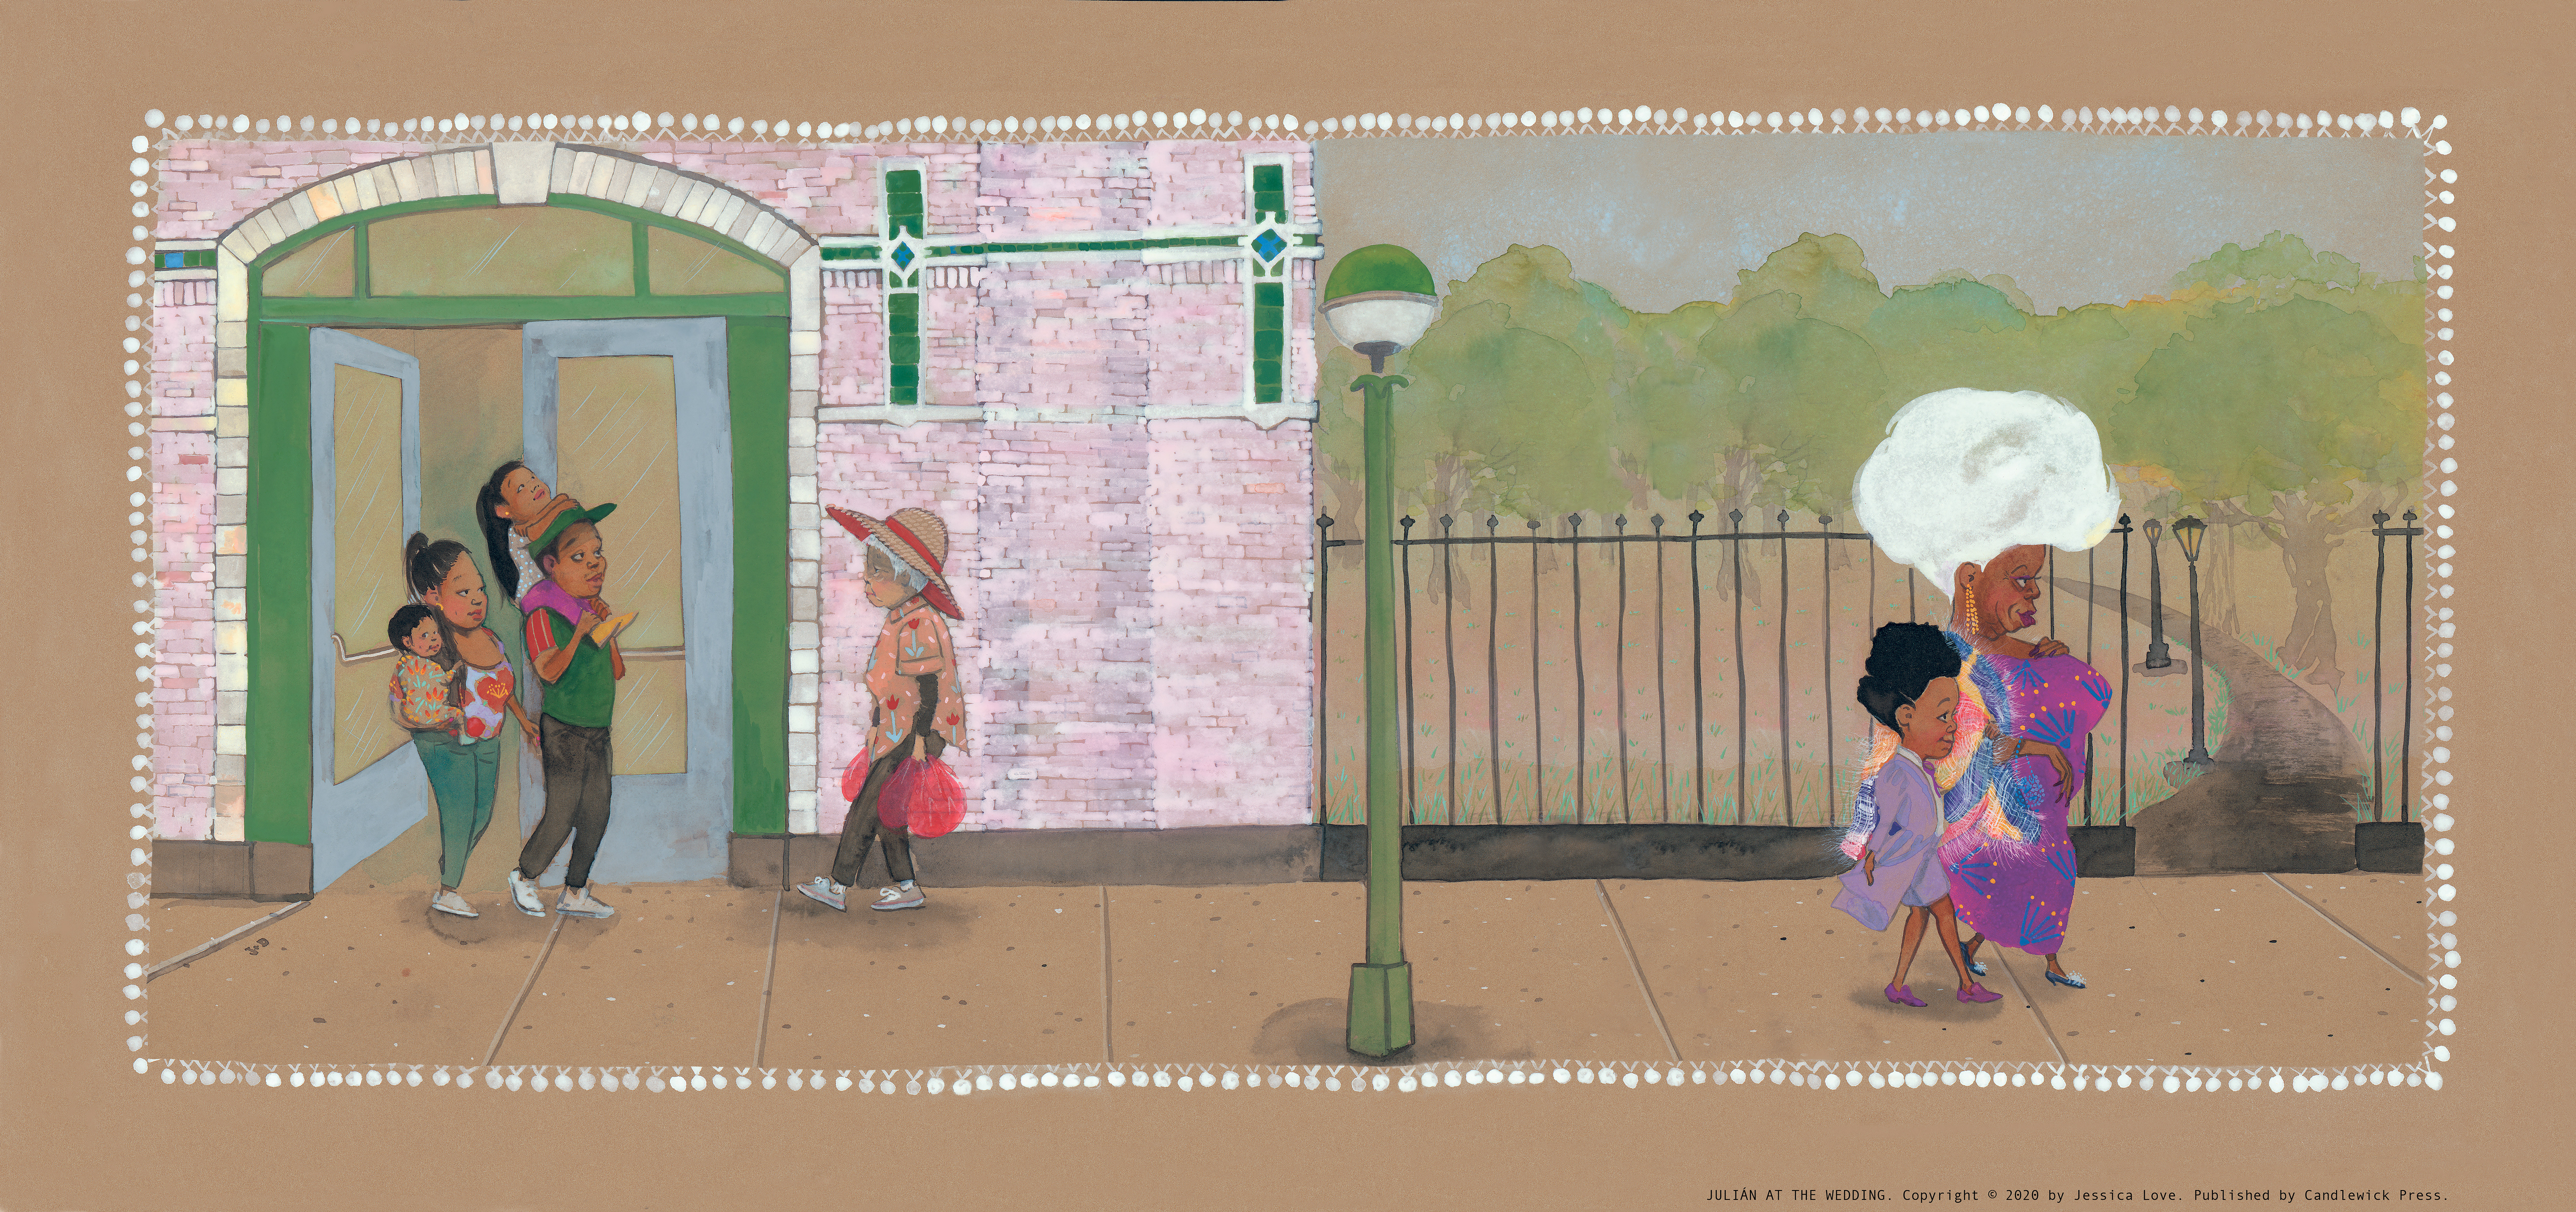 This is the Subway Entrance in Sunset Park, Brooklyn. My old neighborhood. Available as a fine art print, from Society6, in a variety of sizes. Just click on the image for a link to purchase.